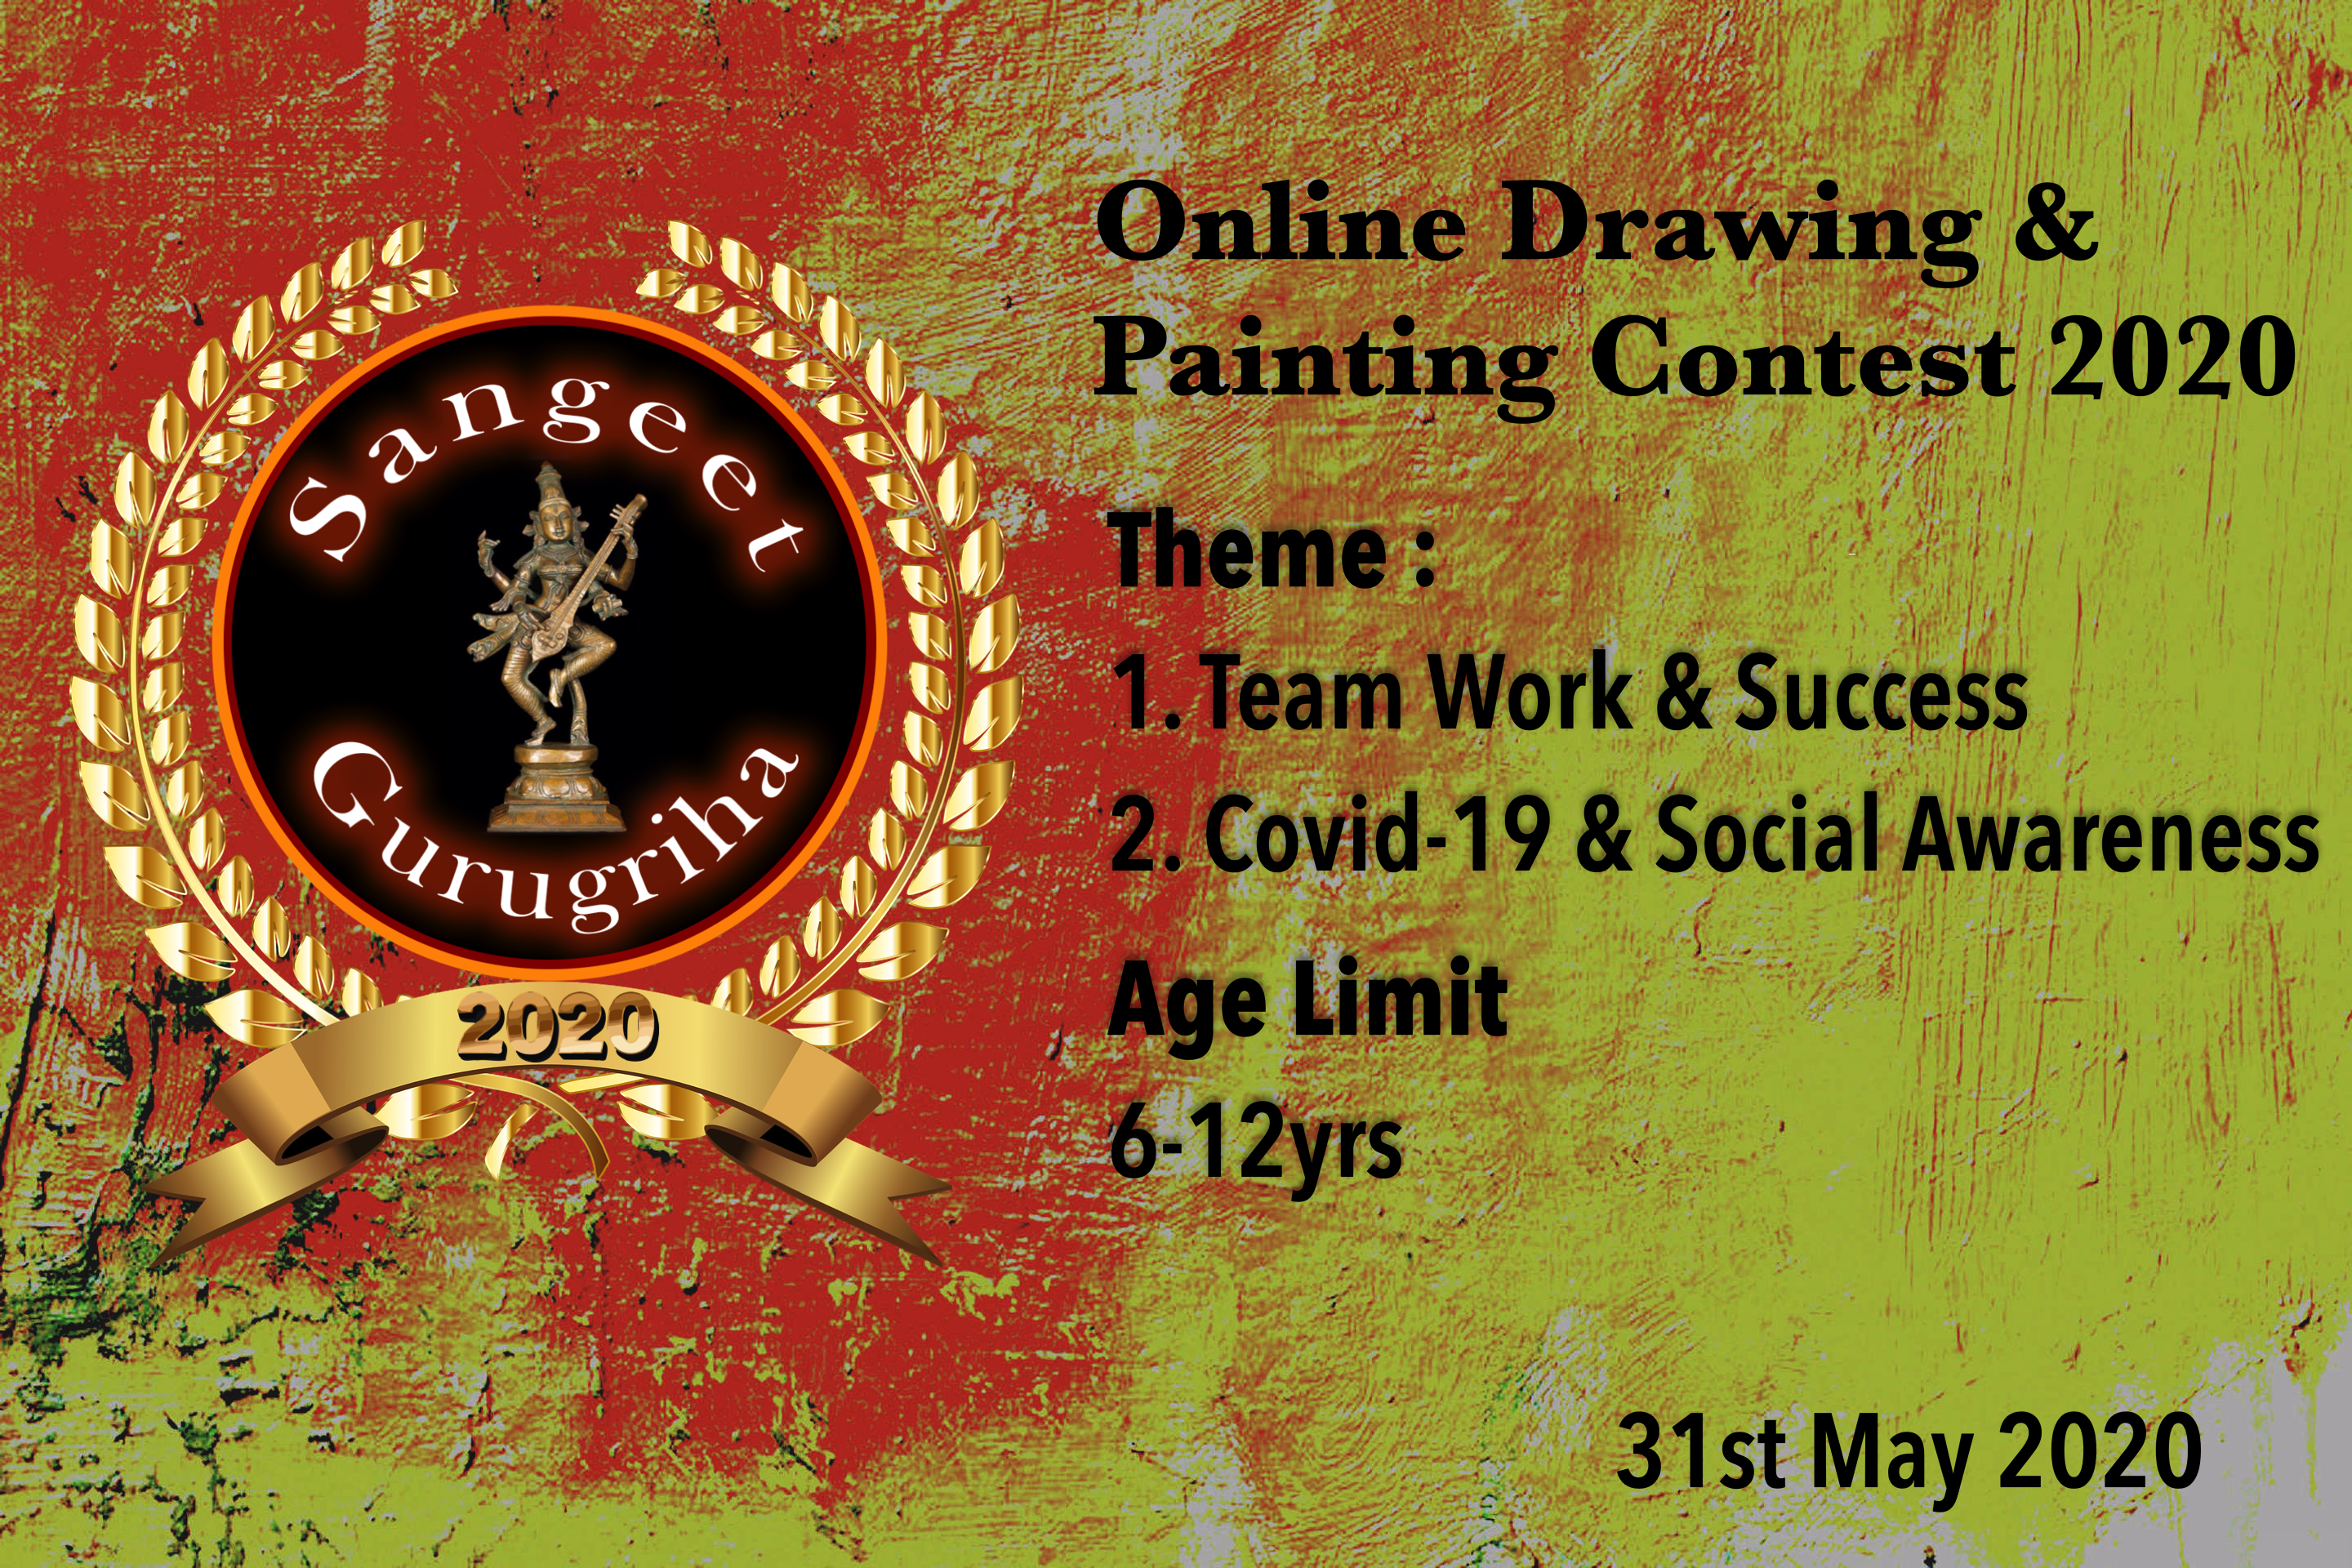 Online Drawing & Painting Contest 2020